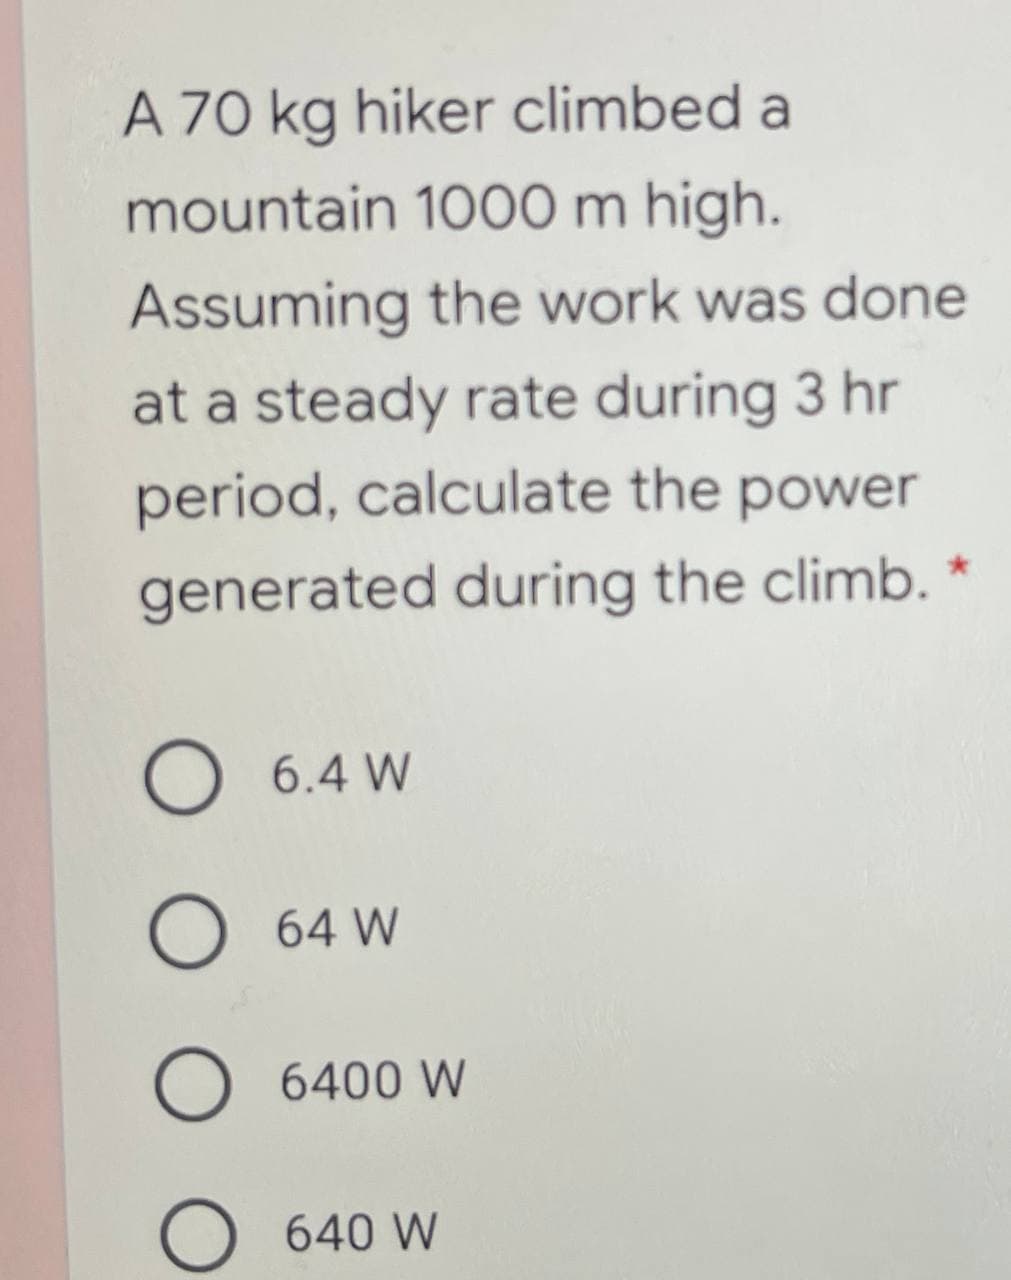 A 70 kg hiker climbed a
mountain 1000 m high.
Assuming the work was done
at a steady rate during 3 hr
period, calculate the power
generated during the climb.
O 6.4 W
O 64 W
O 6400 W
640 W
